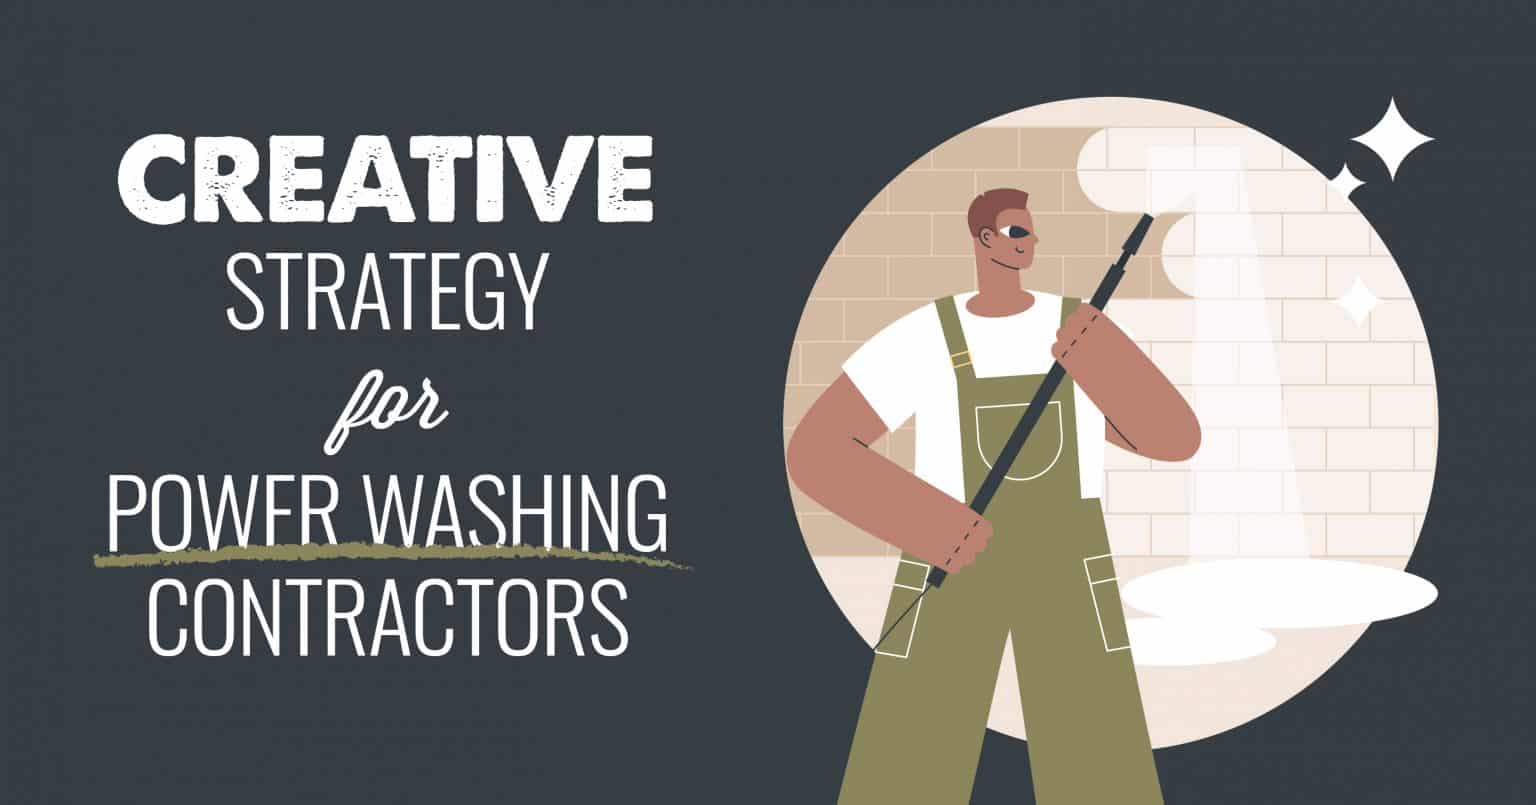 Creative strategy for power washing contractors